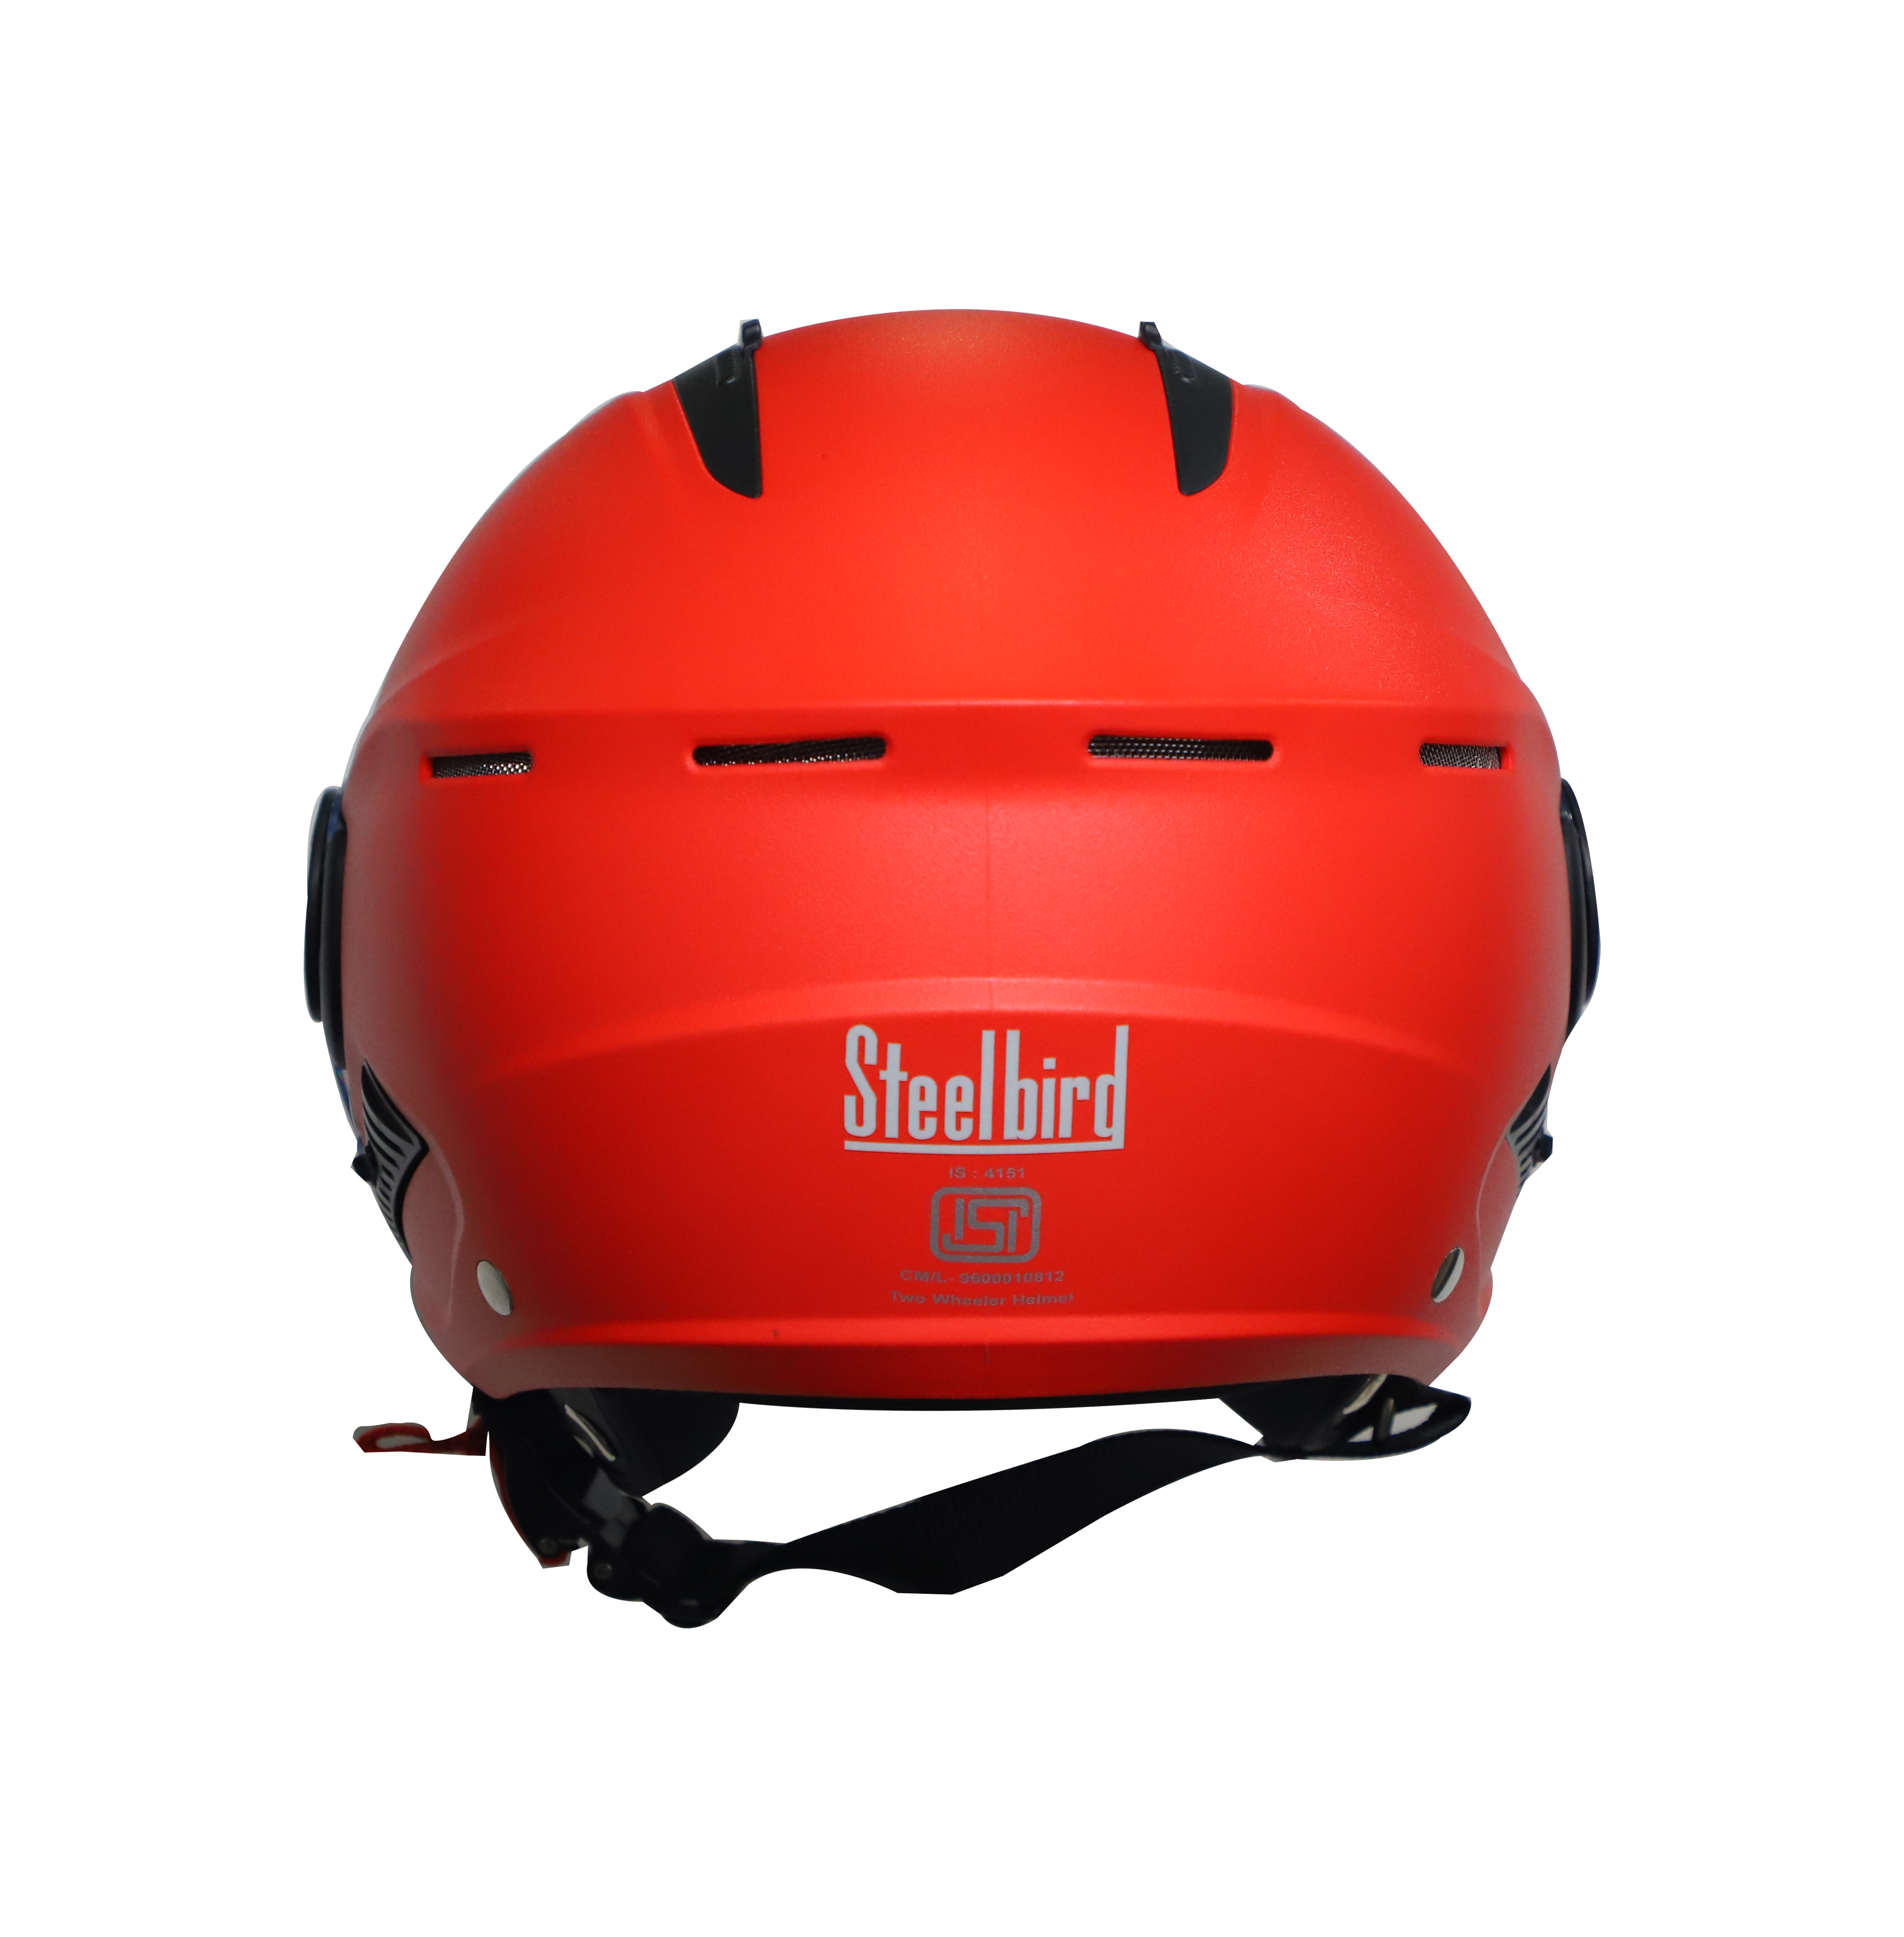 Steelbird SBH-24 Boxx Dashing ISI Certified Open Face Helmet For Men And Women (Red With Smoke Visor)